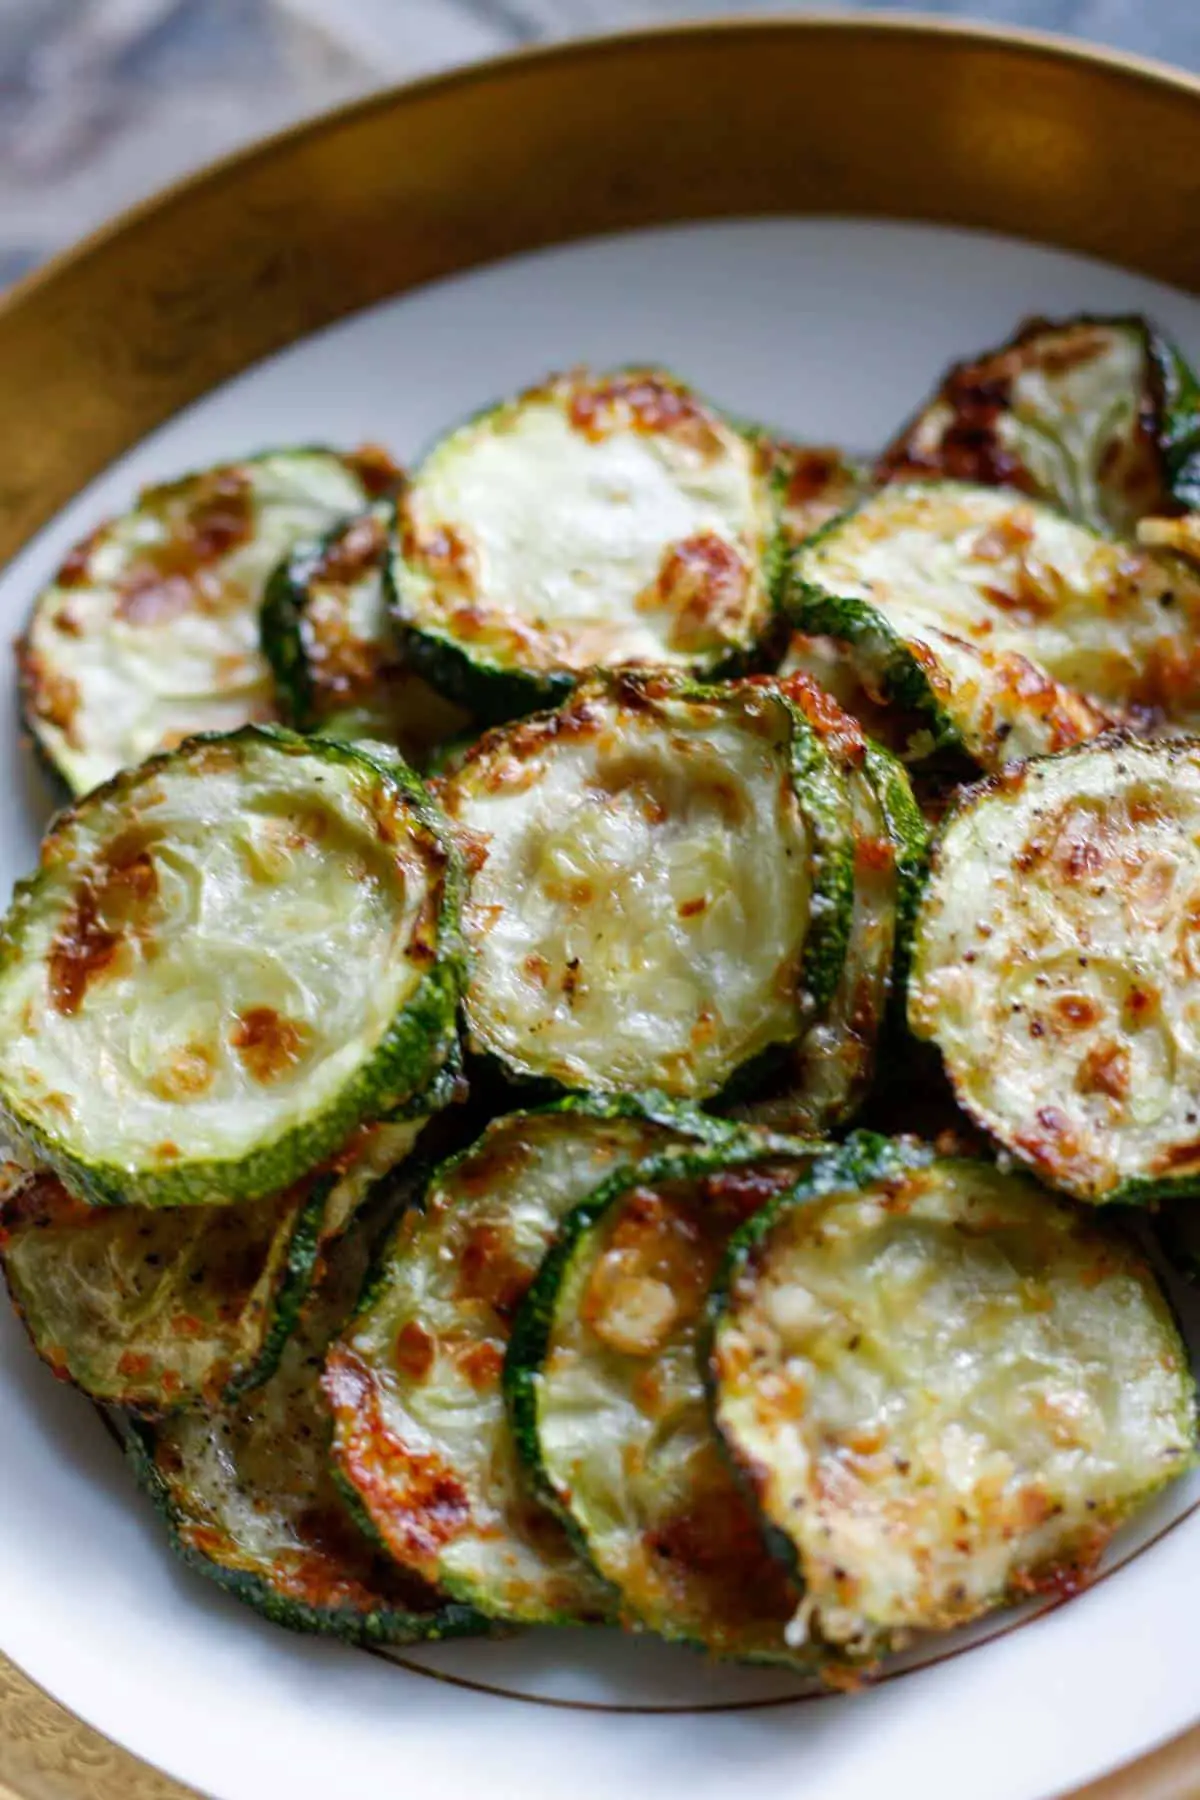 Zucchini disks which have been roasted with browned cheese on top in a gold rimmed bowl.